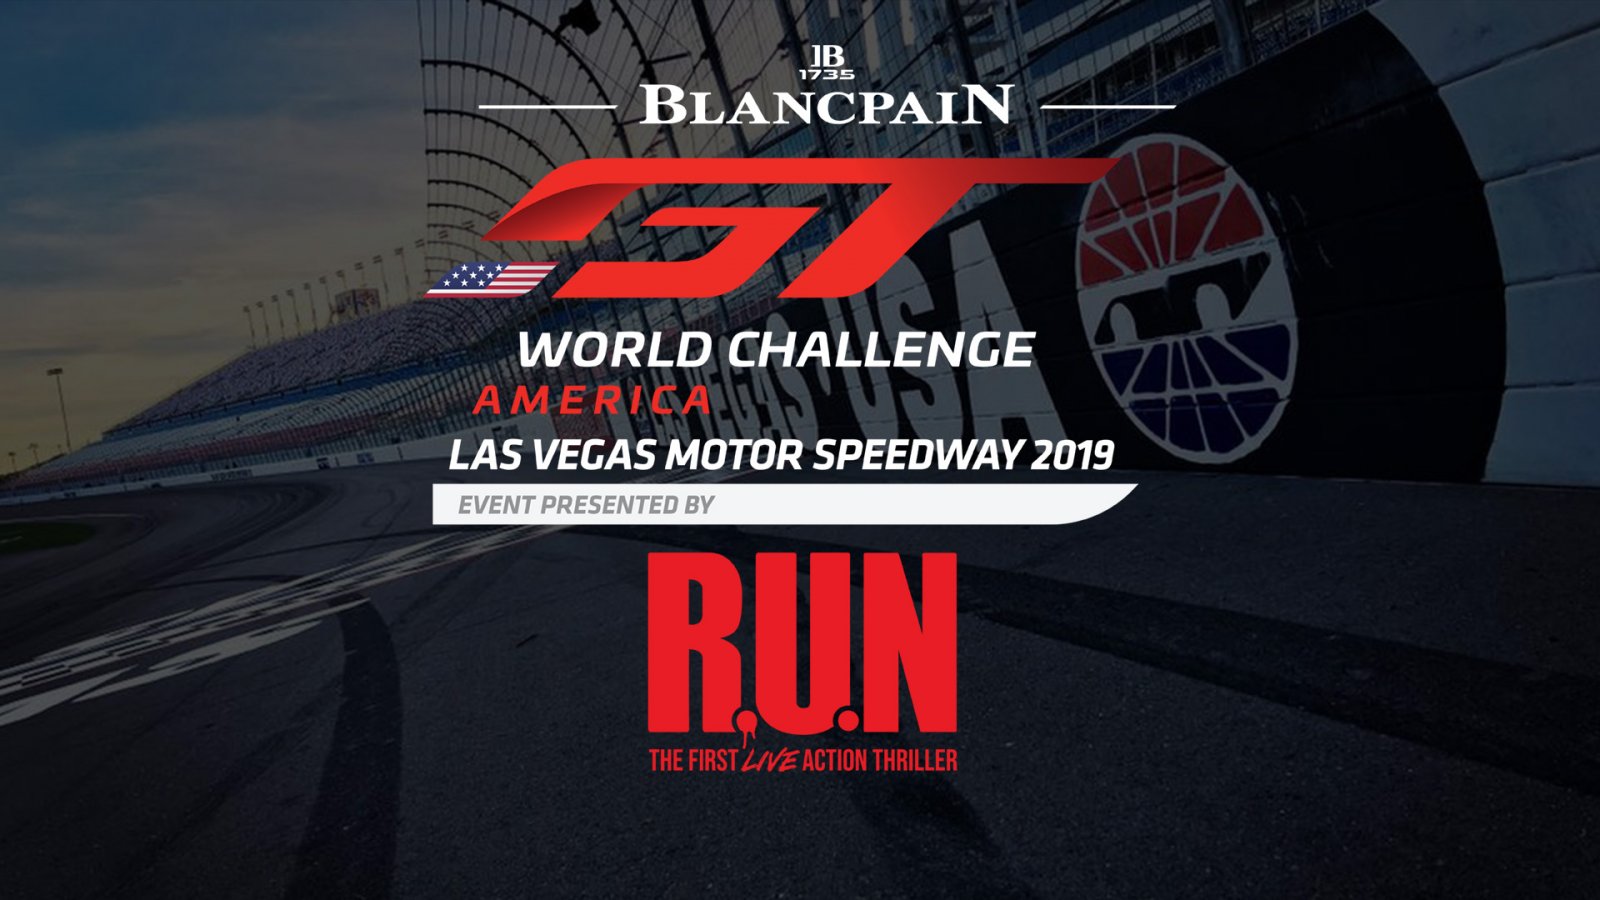 Blancpain GT World Challenge America Partners with R.U.N – The First Live Action Thriller Produced by Cirque du Soleil